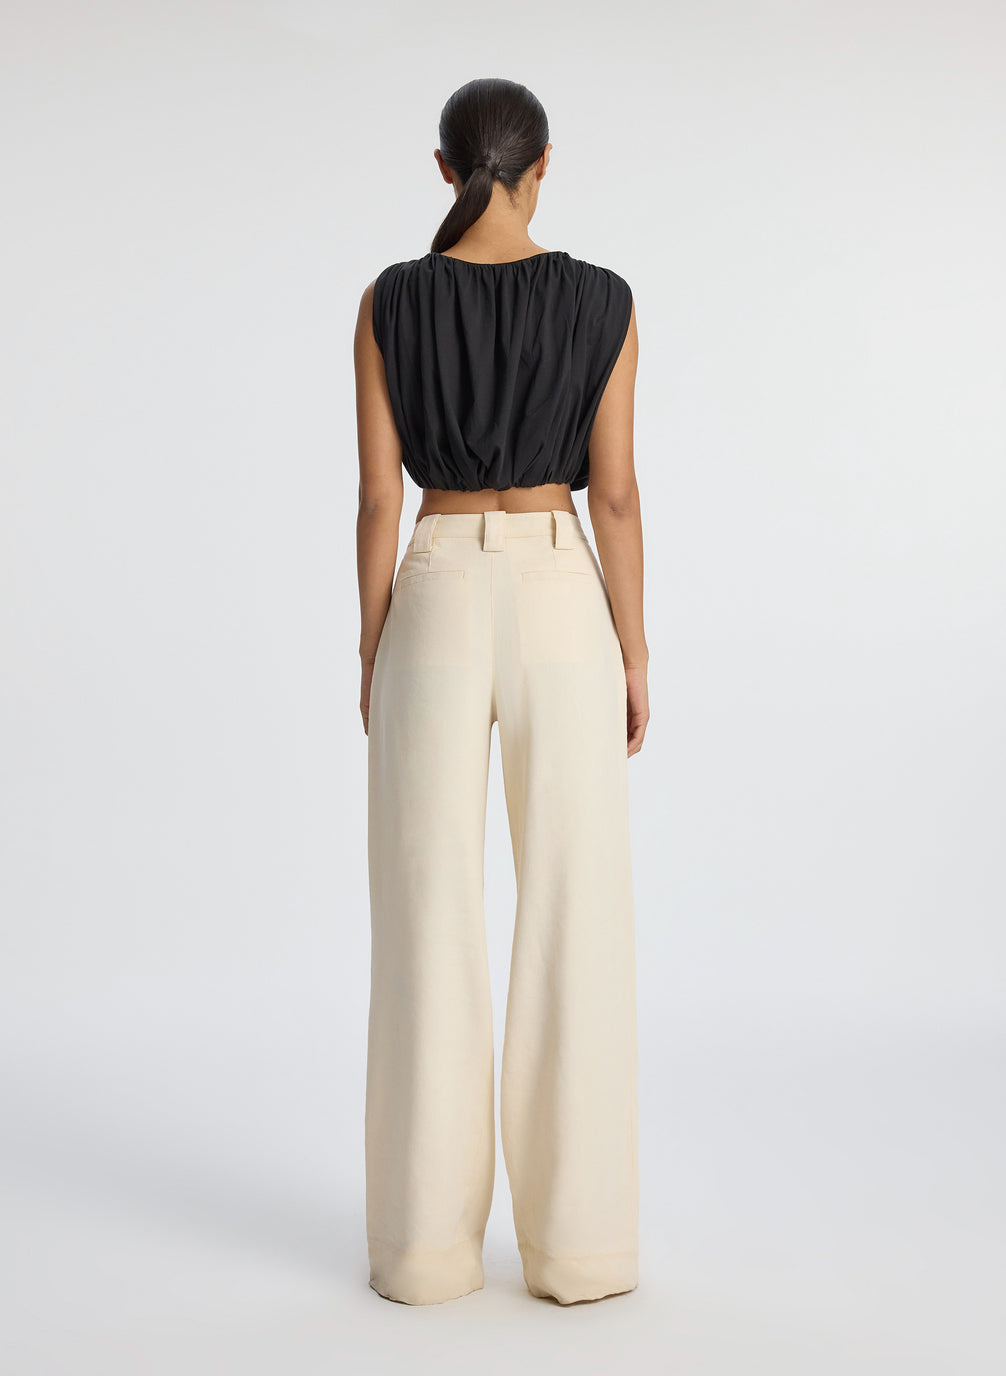 back view of woman wearing black sleeveless cropped top and beige wide leg pants